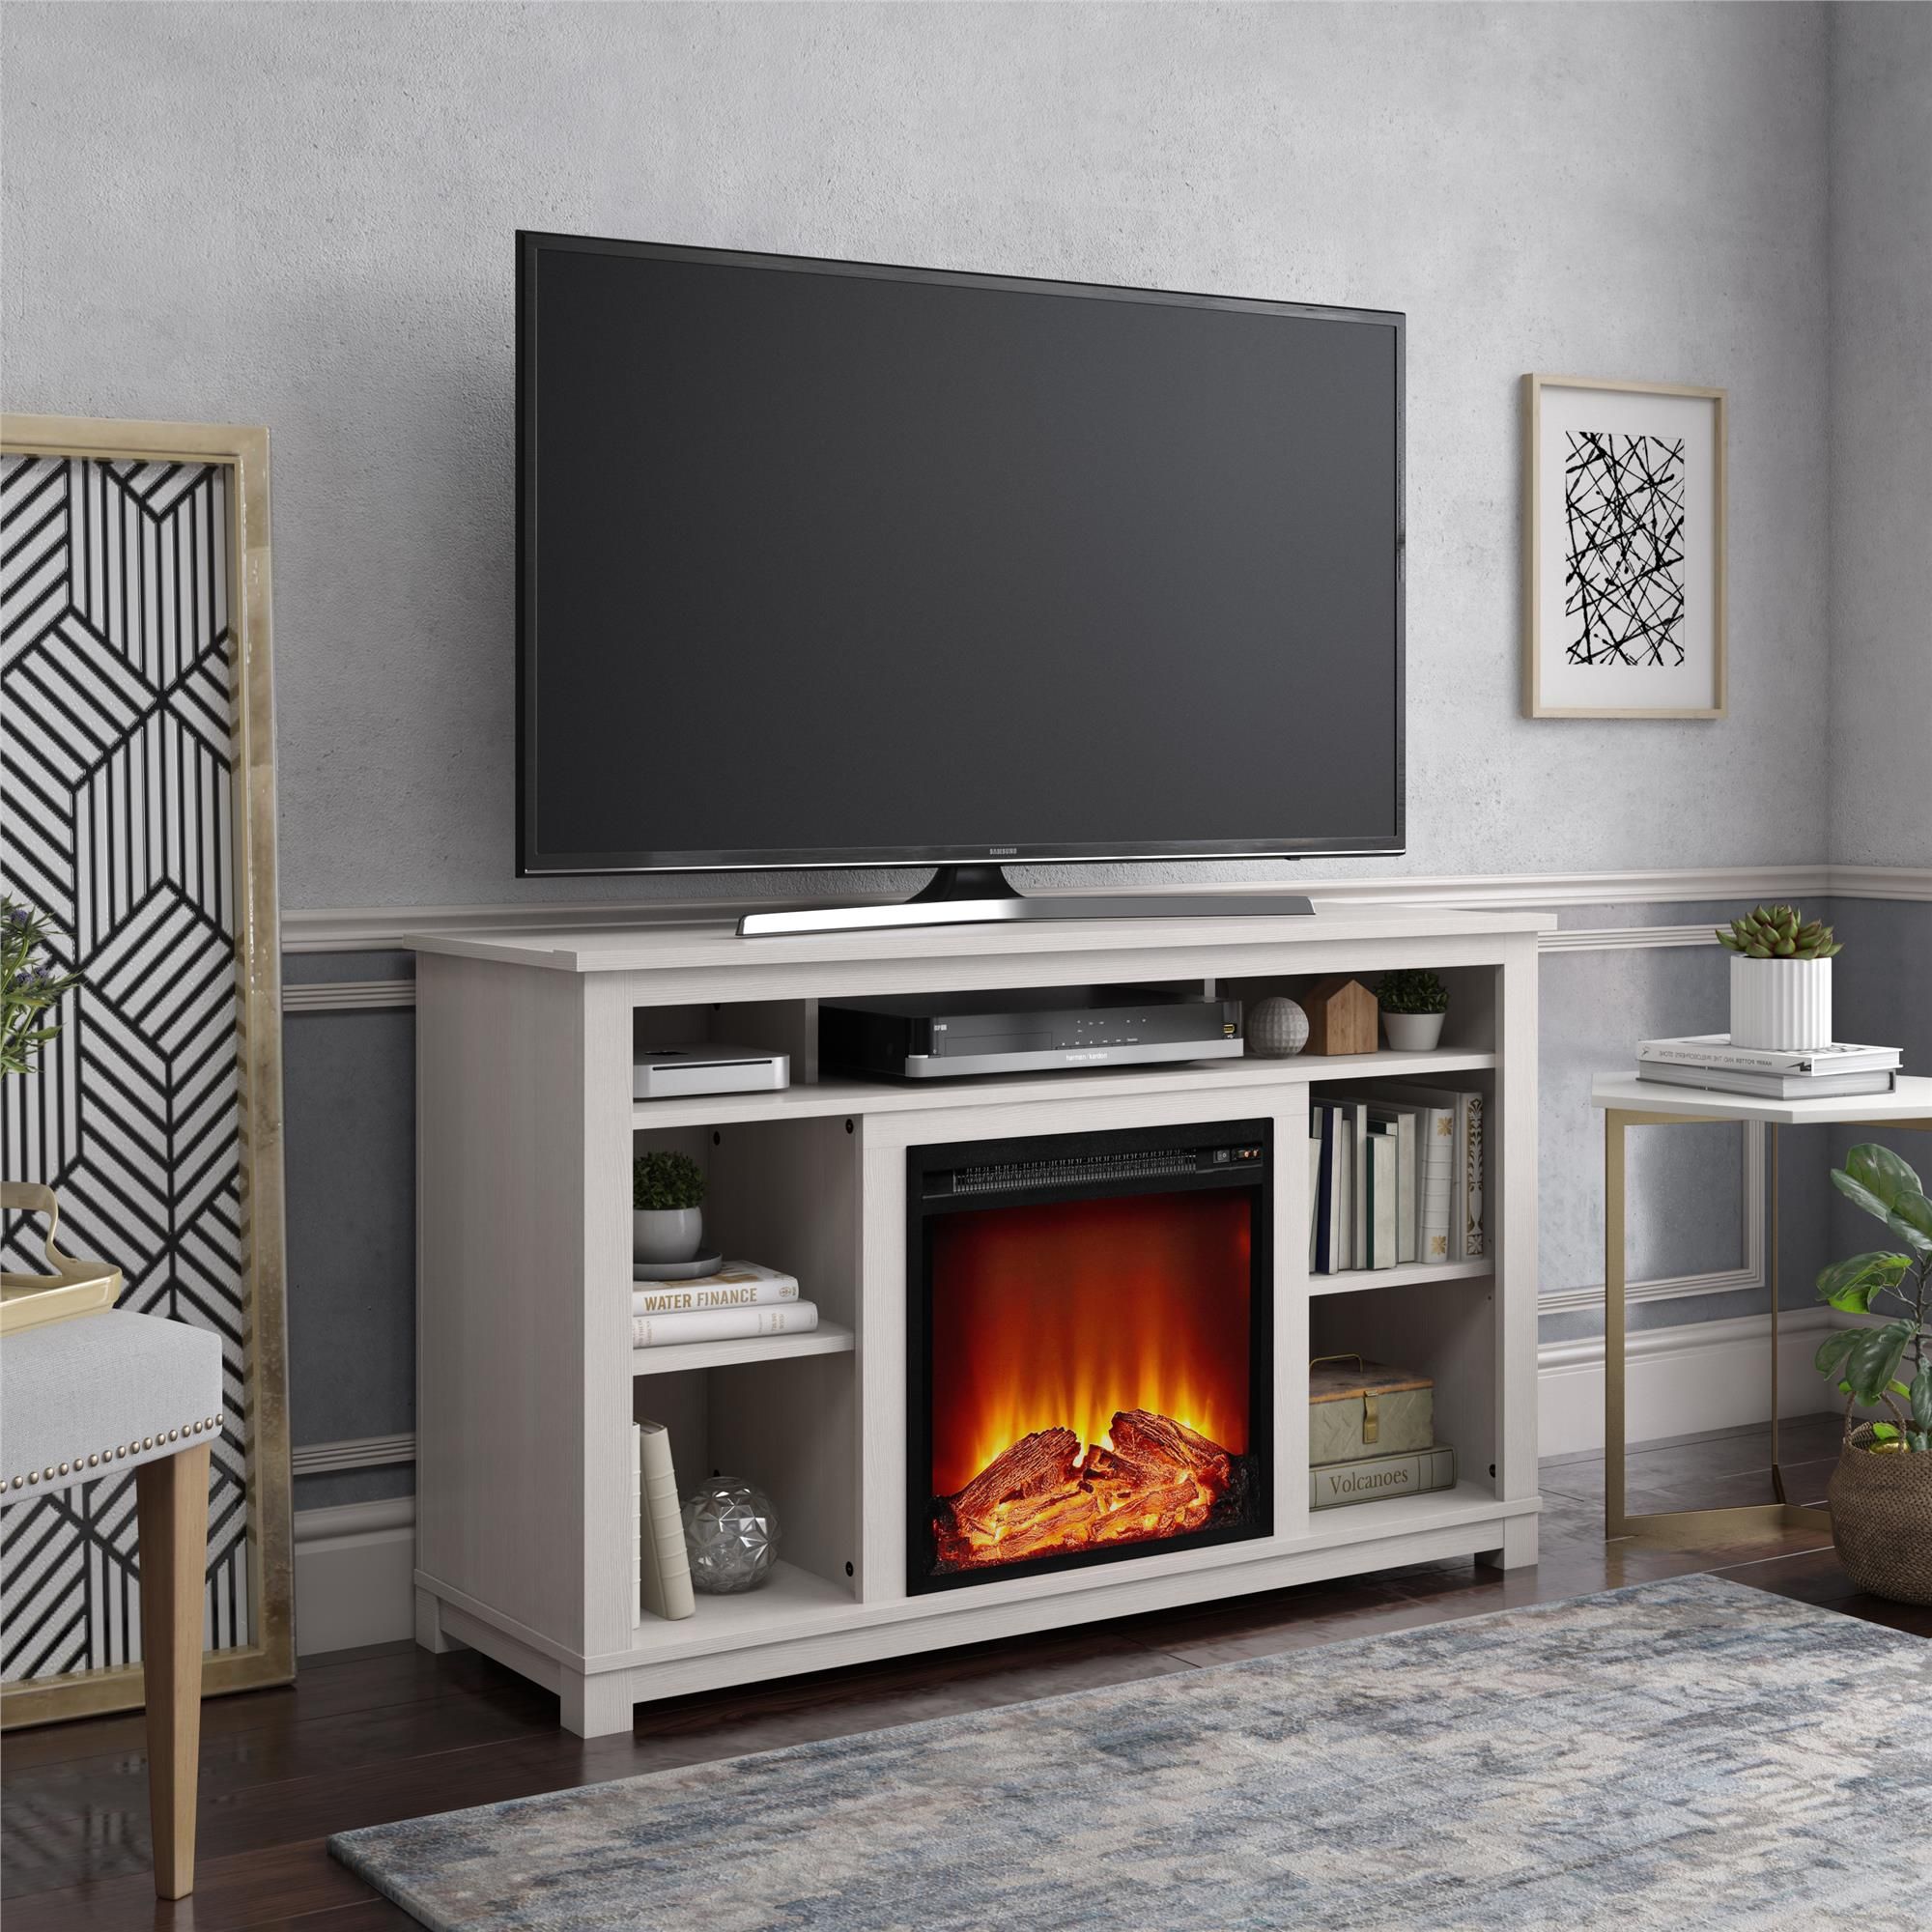 Ameriwood Home Edgewood Fireplace Tv Stand For Tvs Up To For Twila Tv Stands For Tvs Up To 55&quot; (View 10 of 15)